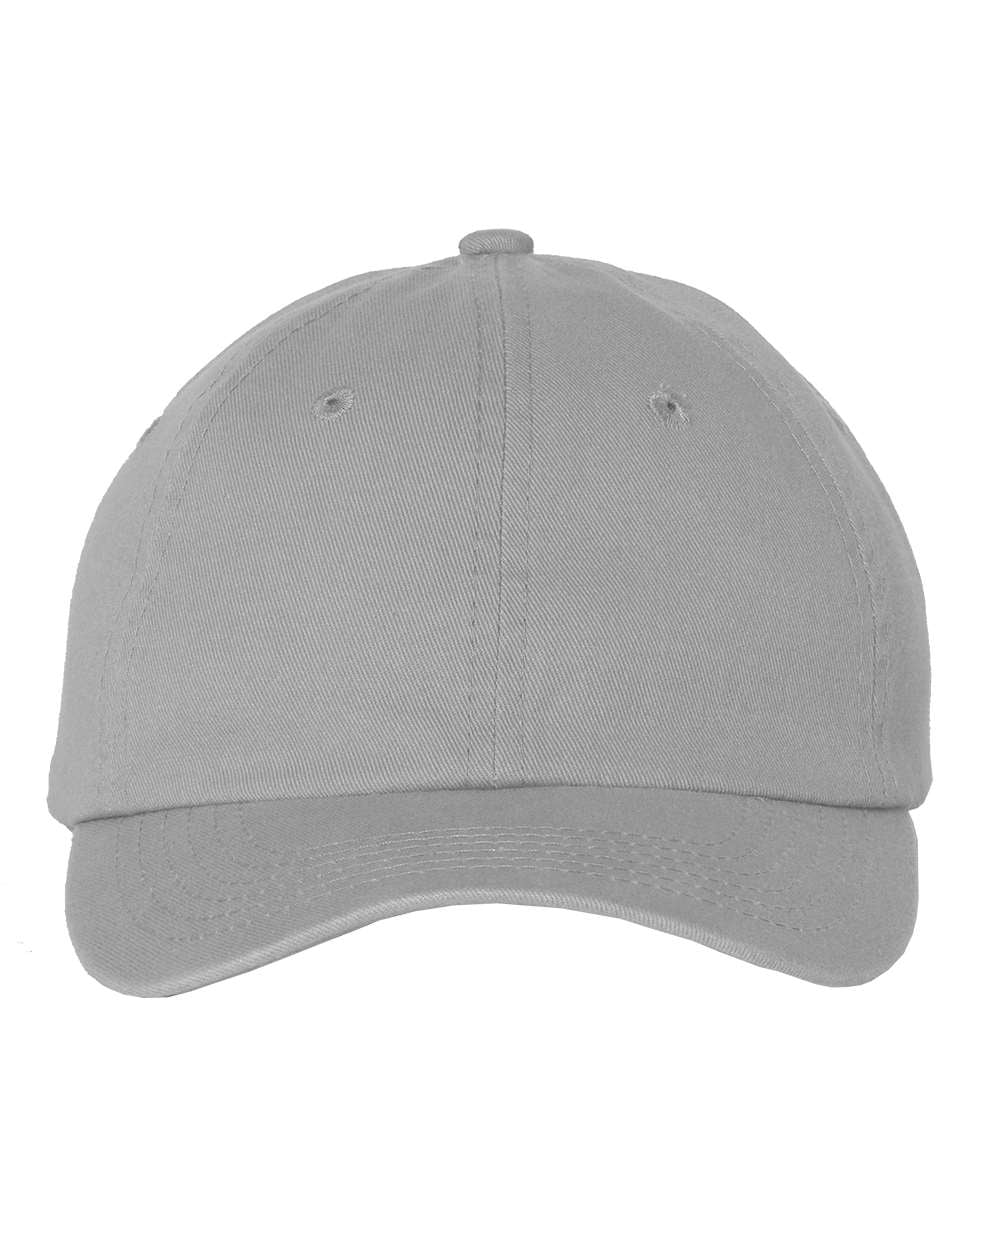 TOP LEVEL APPAREL Youth Small Fit Bio Washed Unstructured Cotton Unisex Baseball Dad Hat 